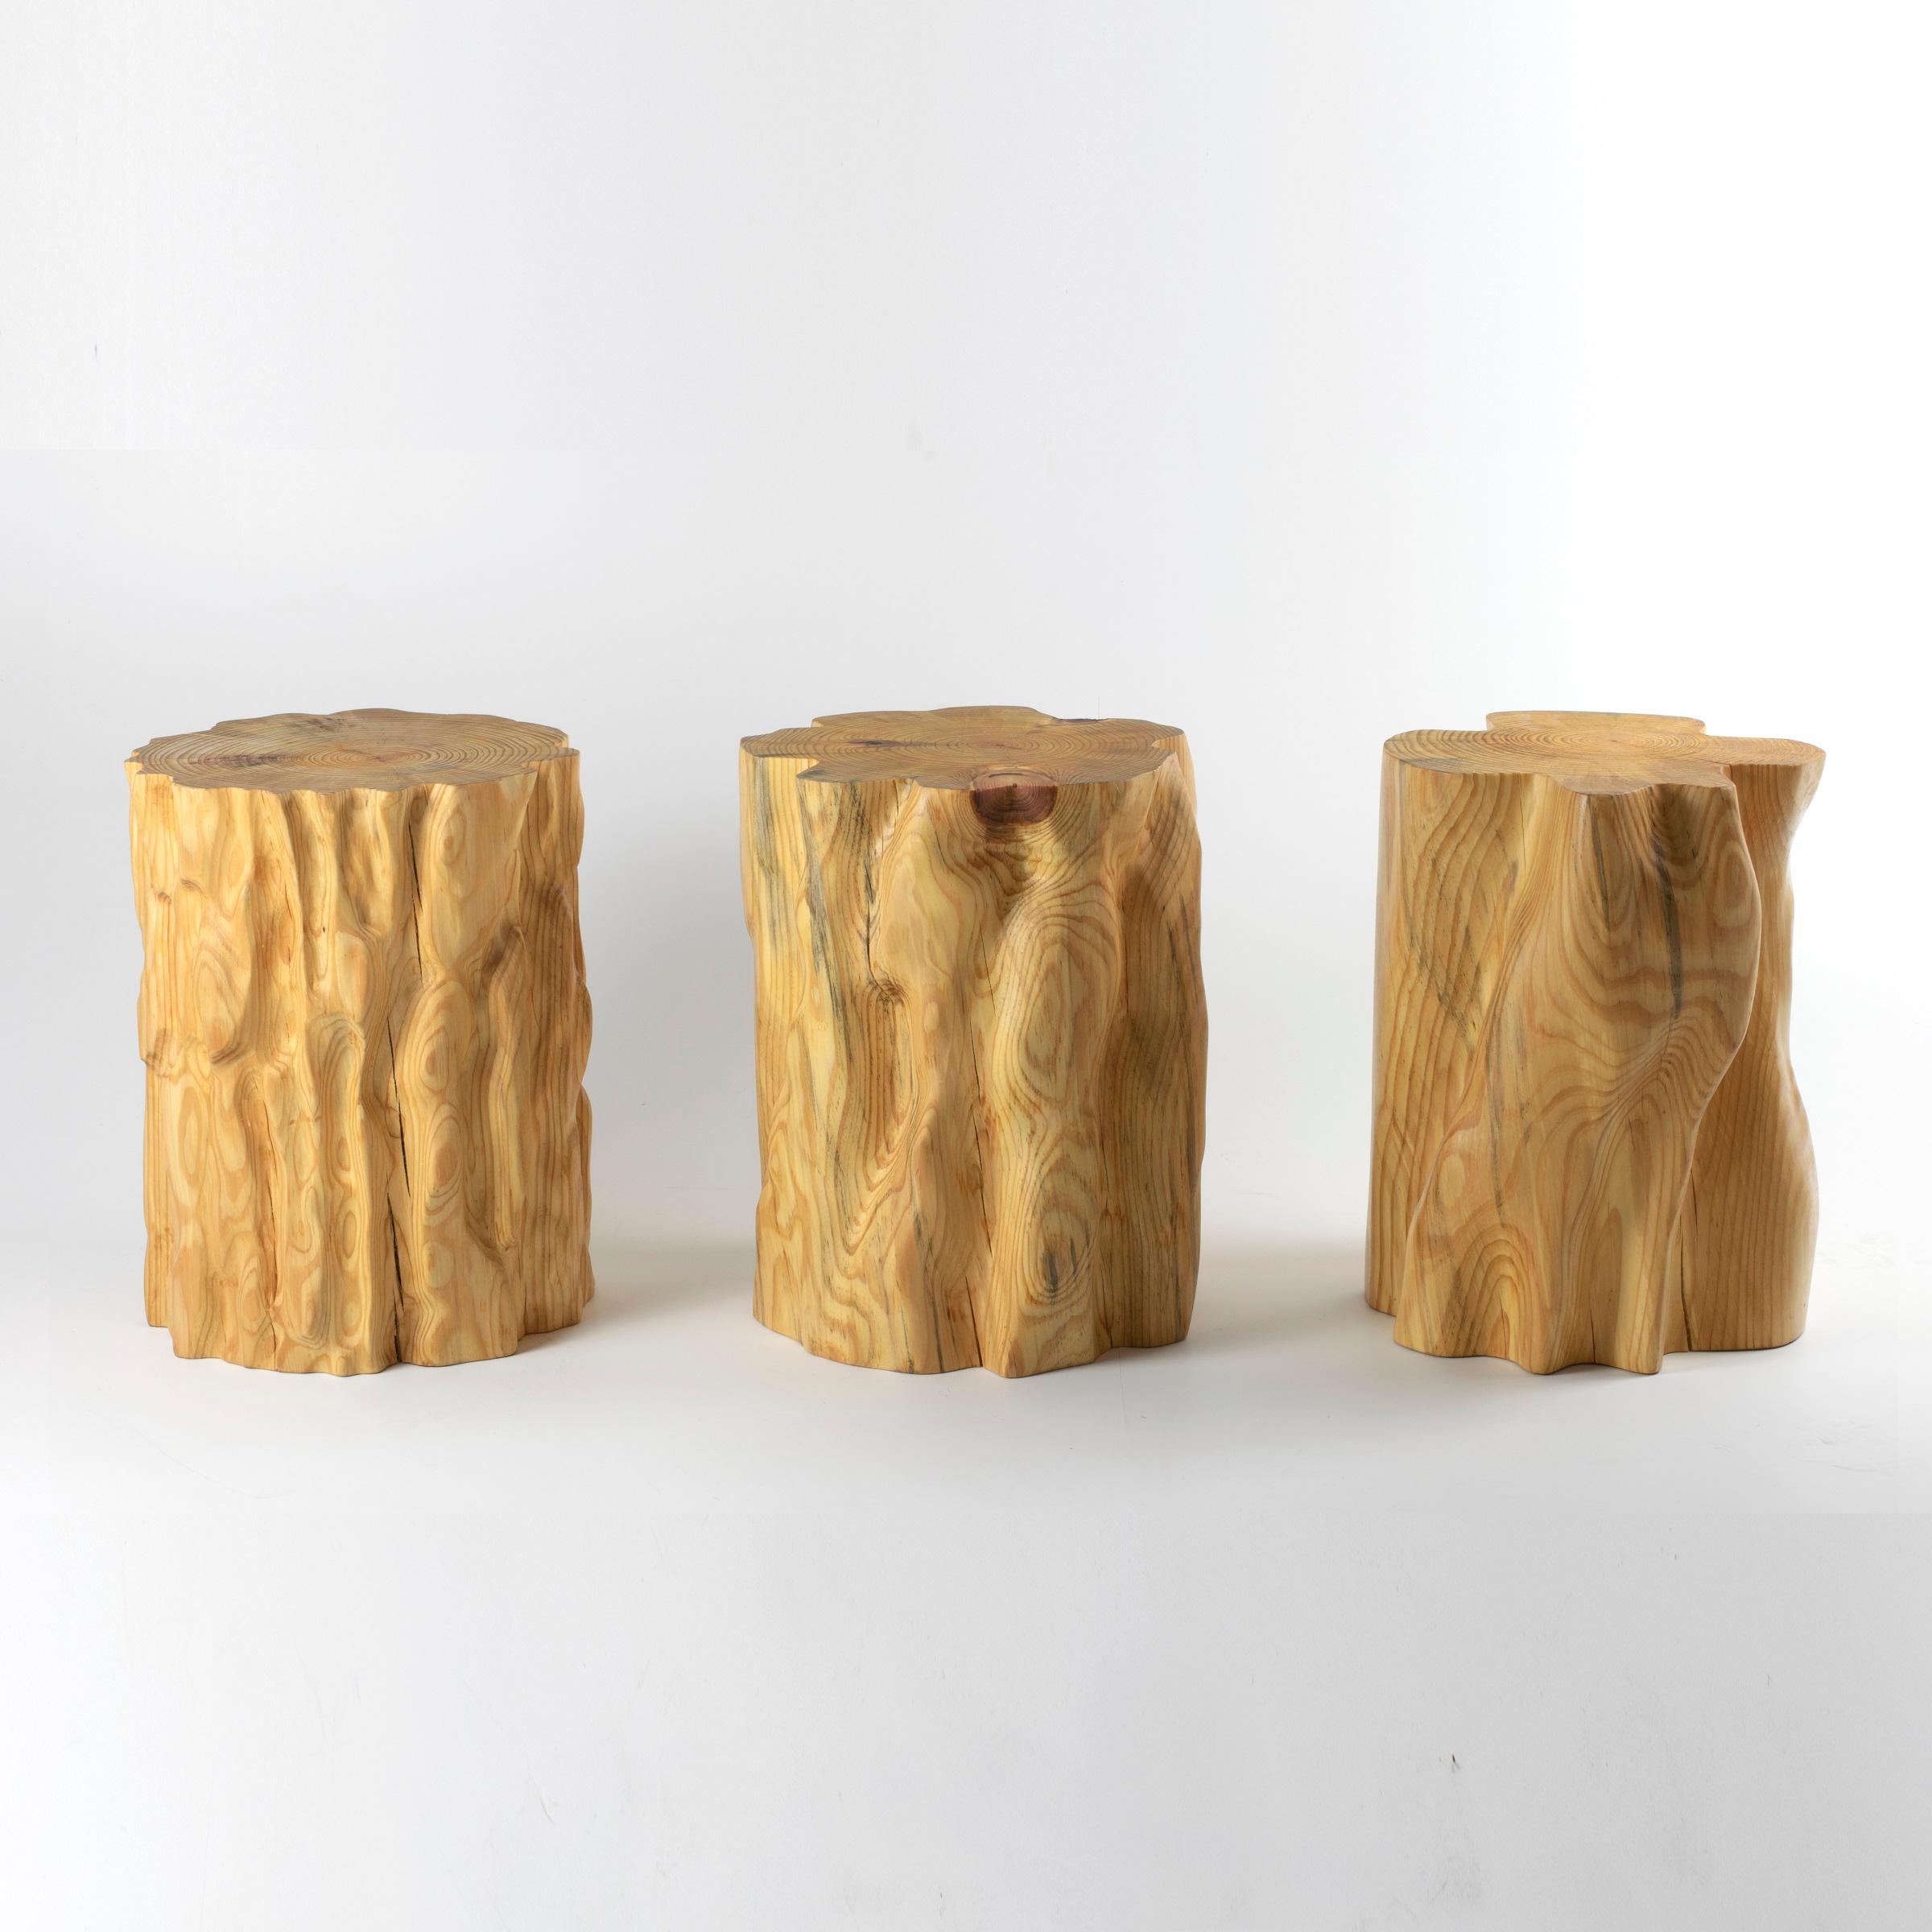 Machine-Made Bark Scale Stool #II by Timbur, Represented by Tuleste Factory For Sale